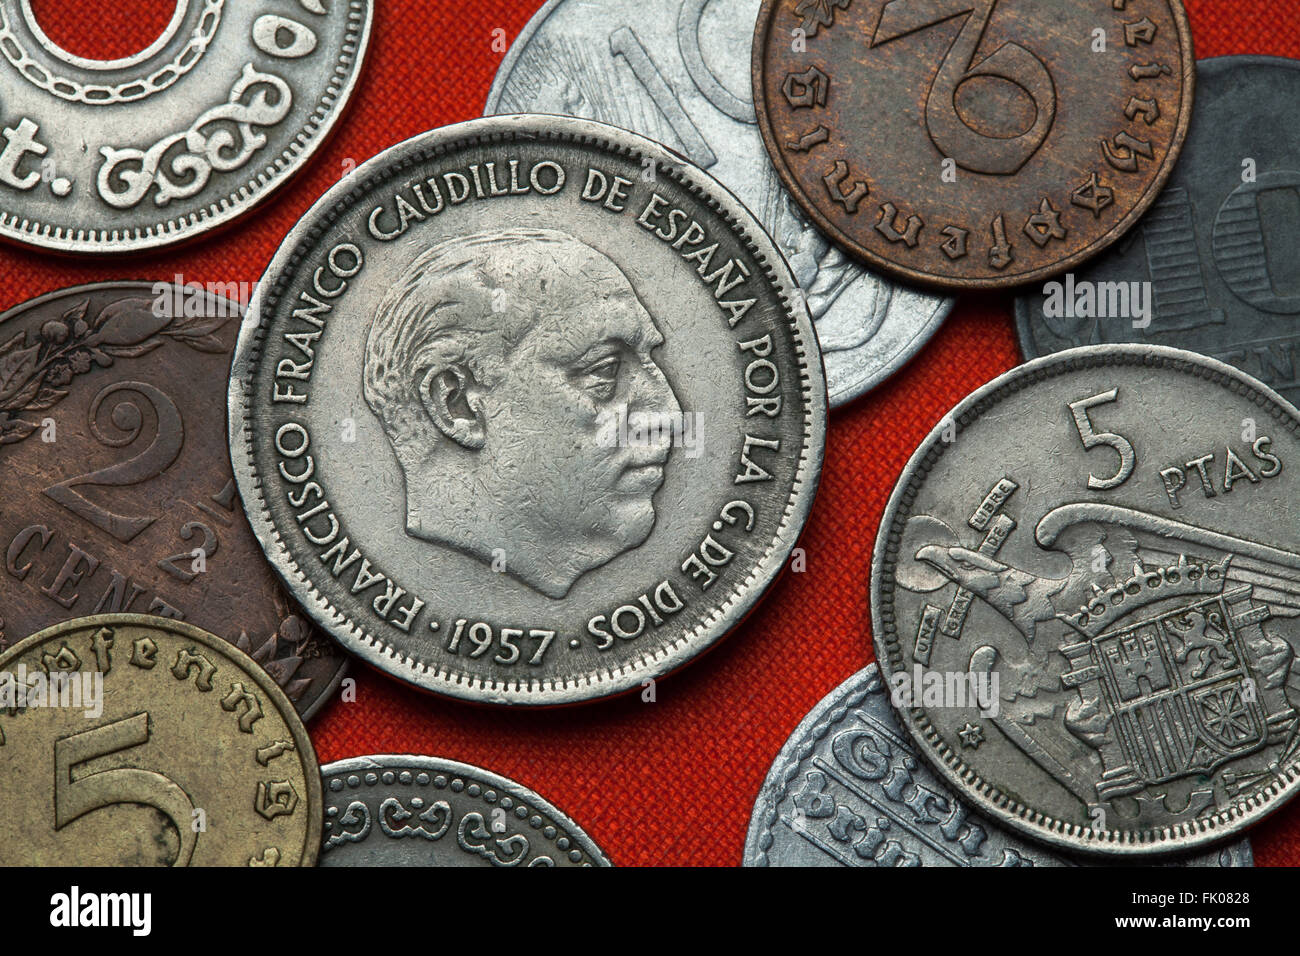 Coins of Spain under Franco. Spanish dictator Francisco Franco depicted in the Spanish 25 peseta coin (1957). Stock Photo